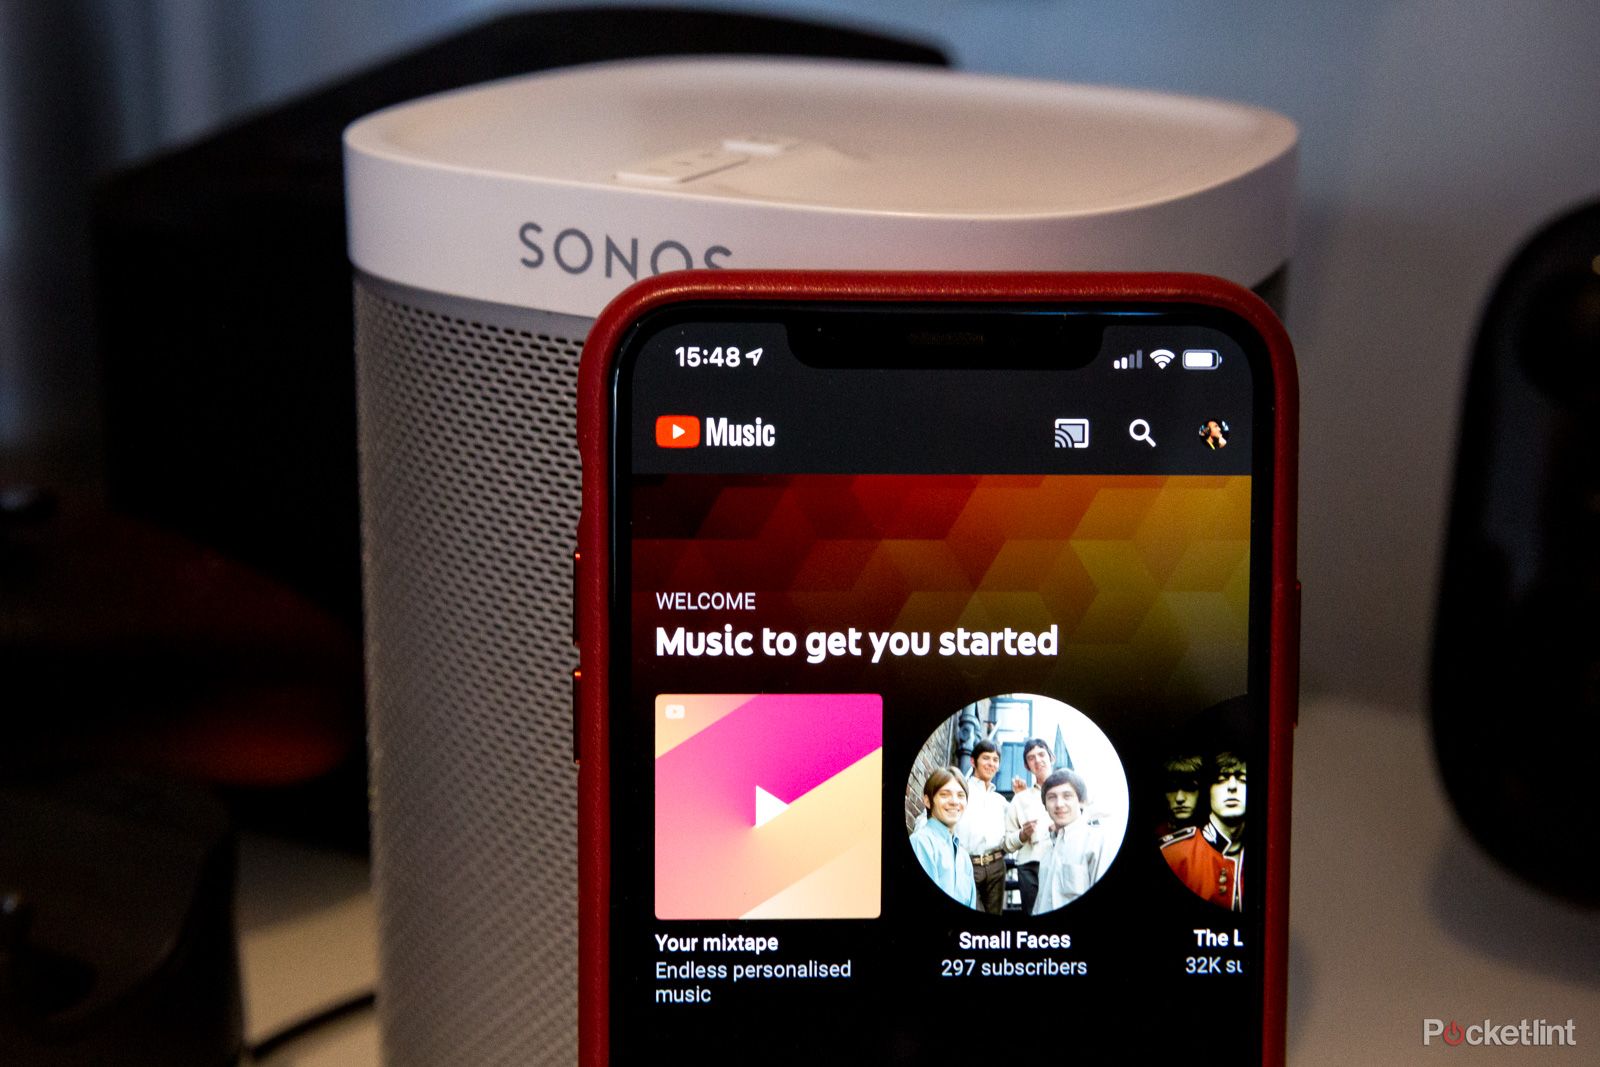 YouTube Music on iPhone in front of a Sonos speaker